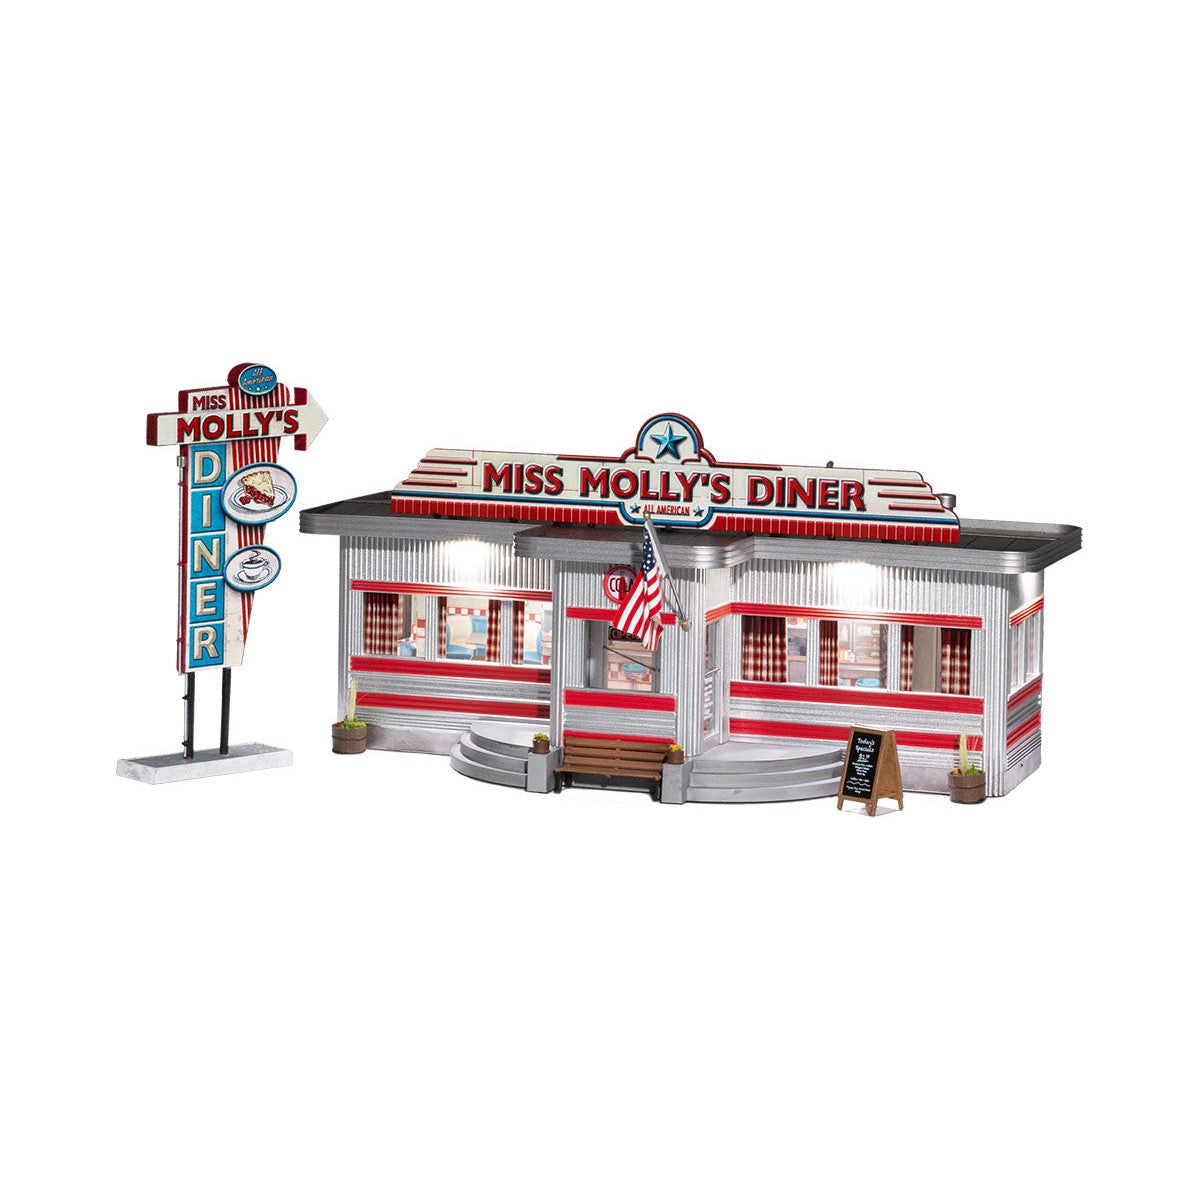 Woodland Scenics O Scale Miss Molly’s Diner Built and Ready